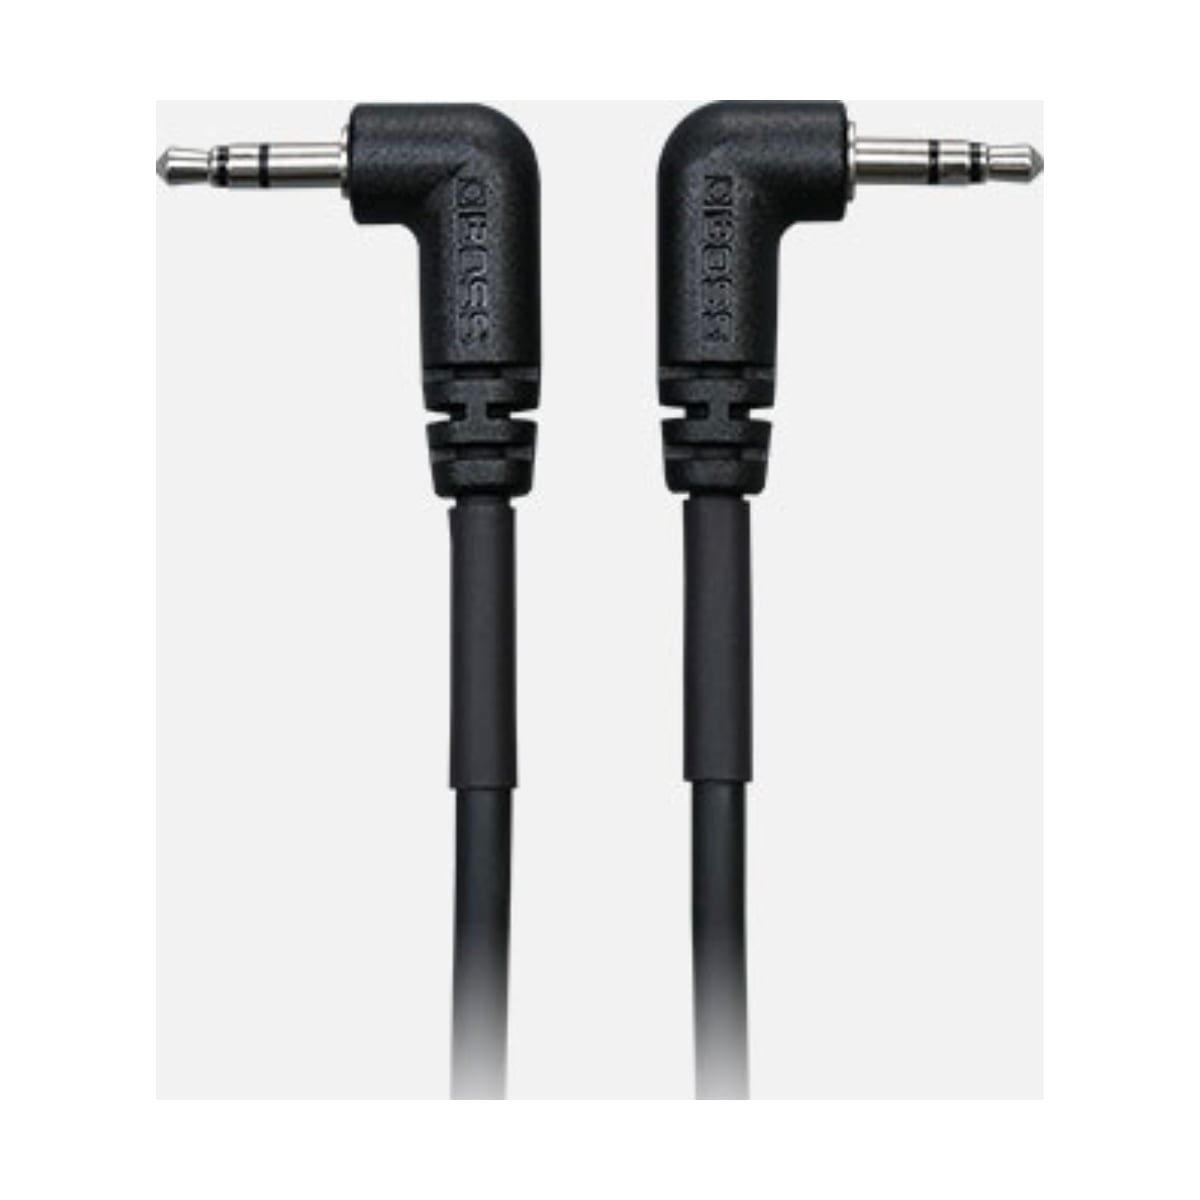 BOSS TRS to TRS Midi cable